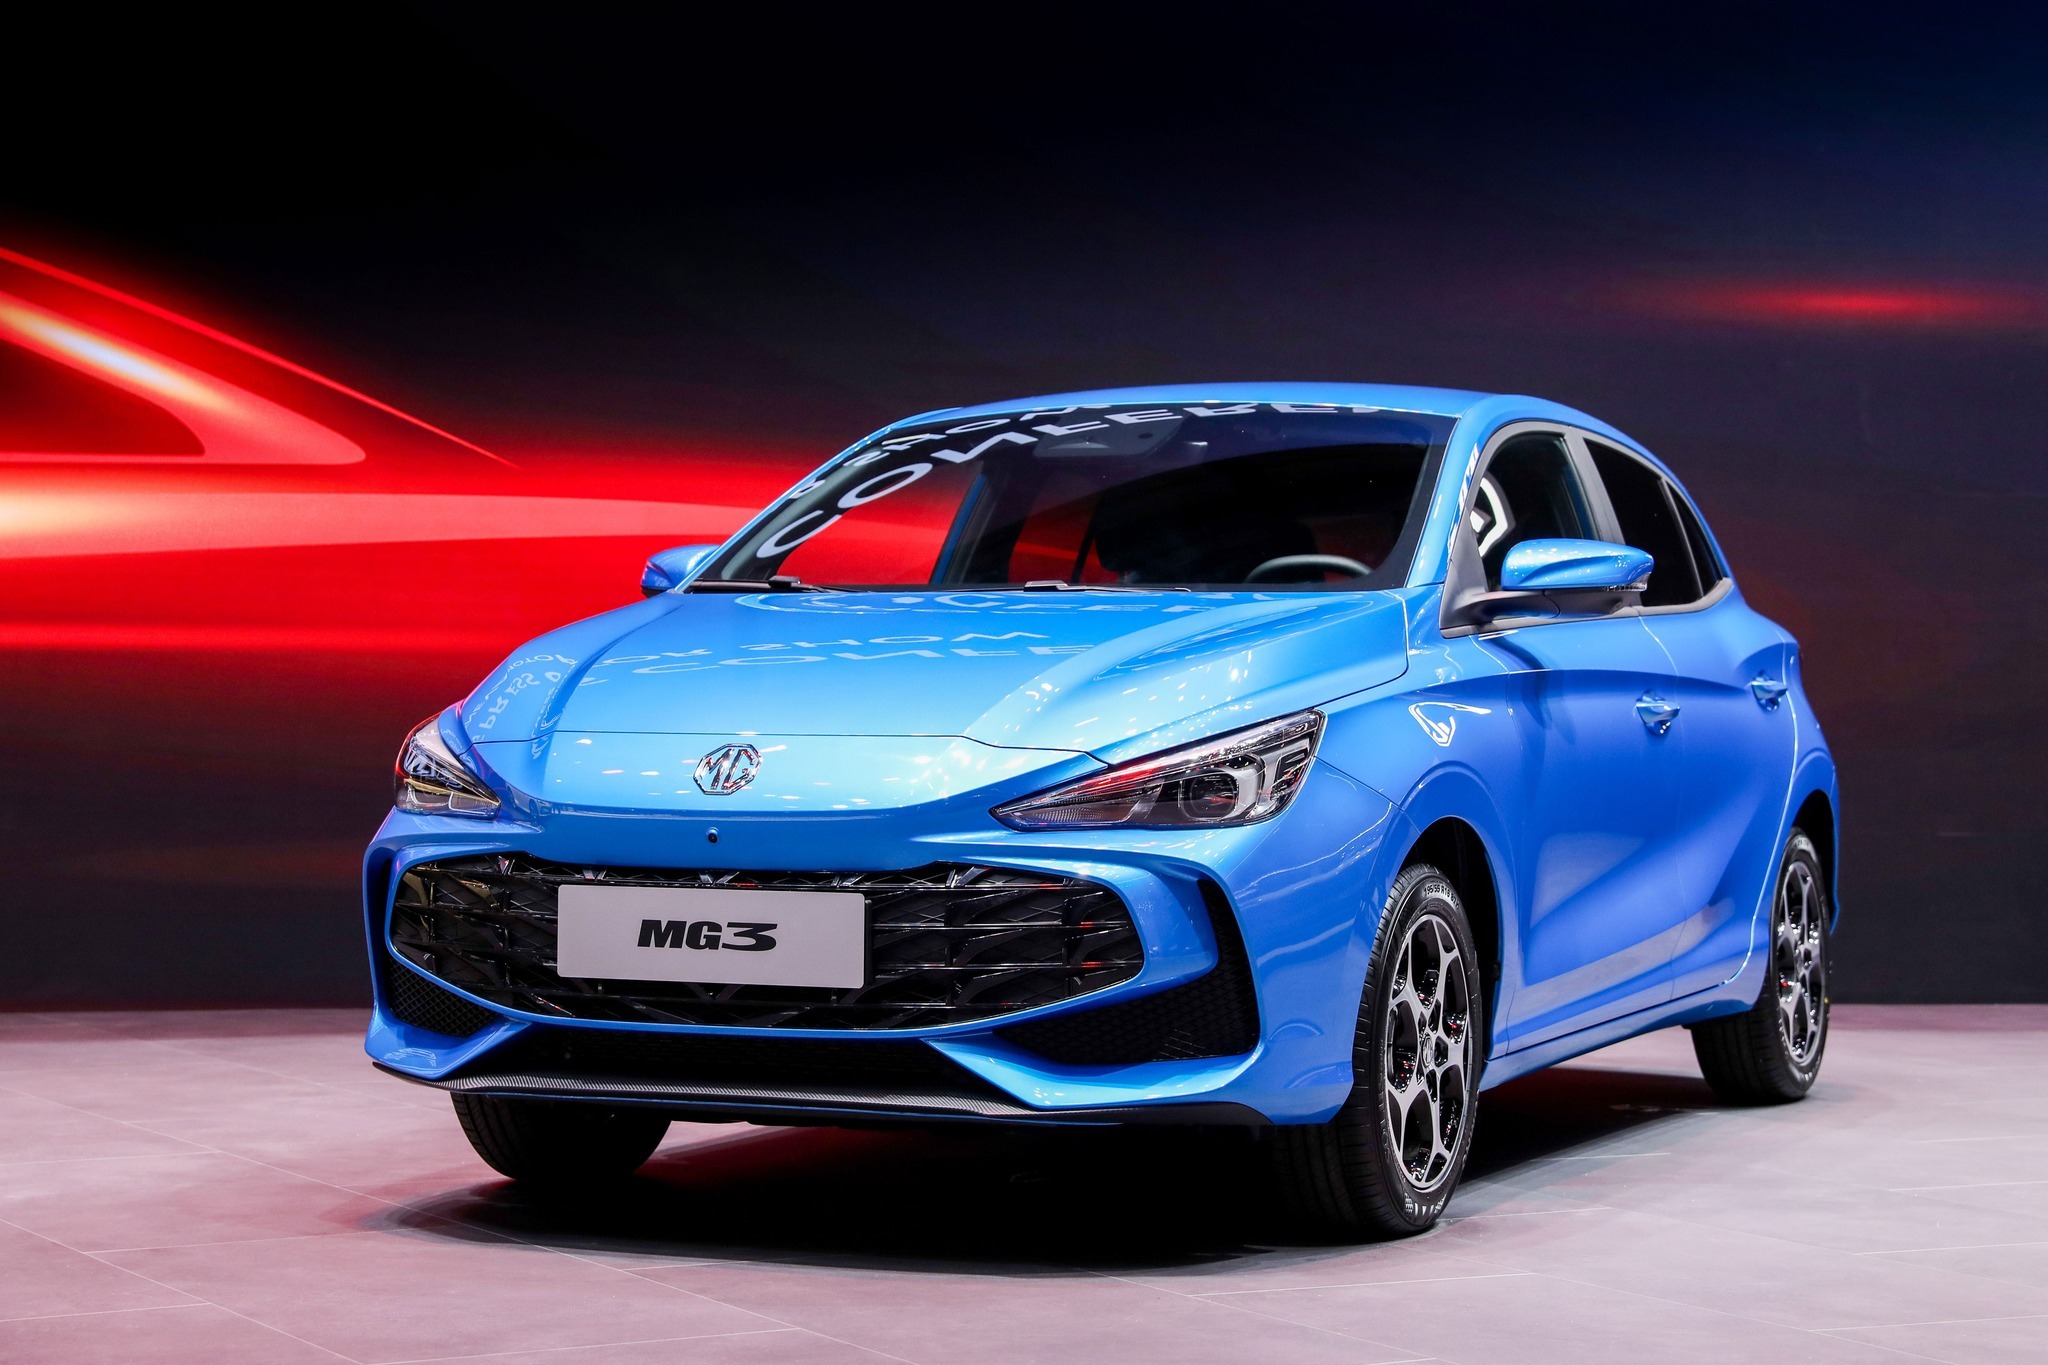 Introducing the all-new MG3 Hybrid+